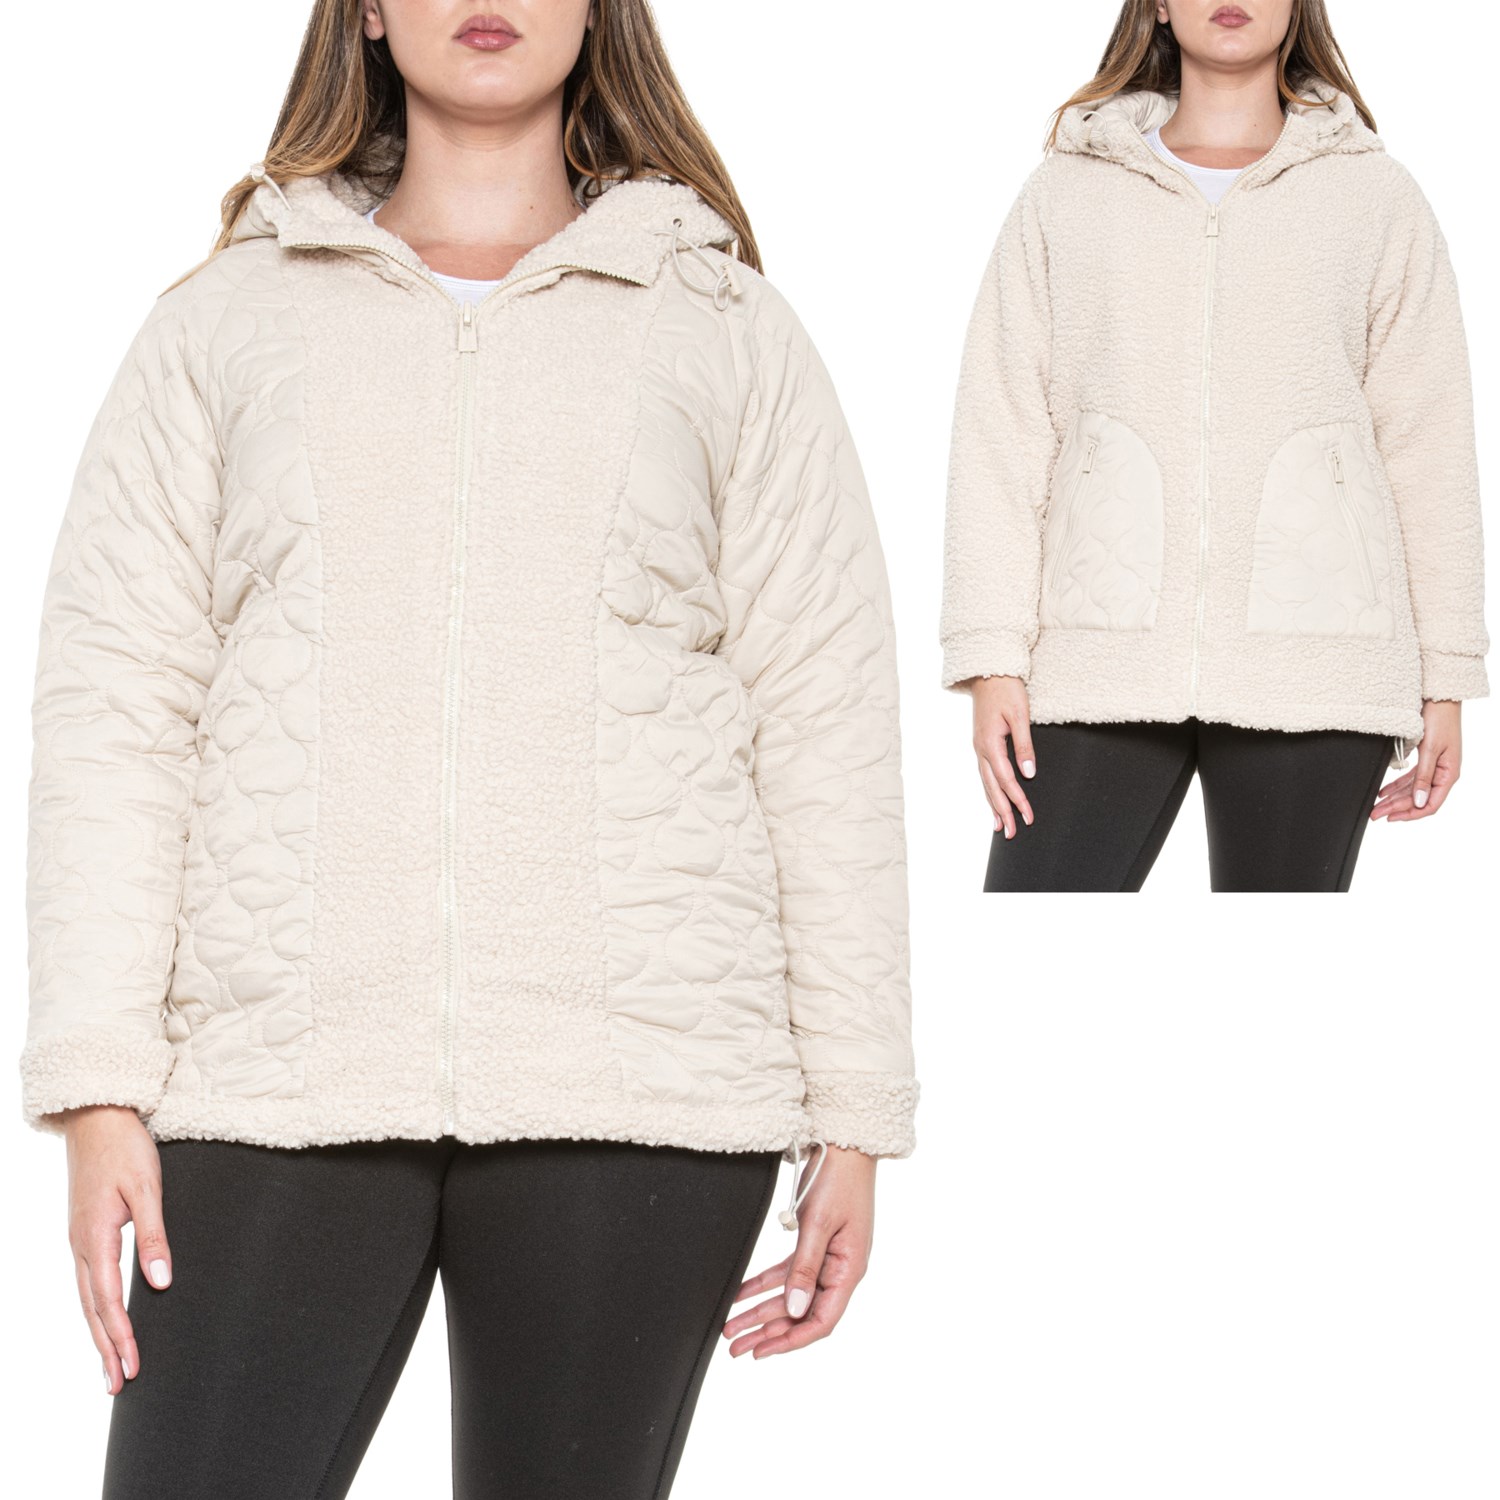 Hurley Mixed Media Reversible Jacket - Sherpa and Quilted - Save 51%